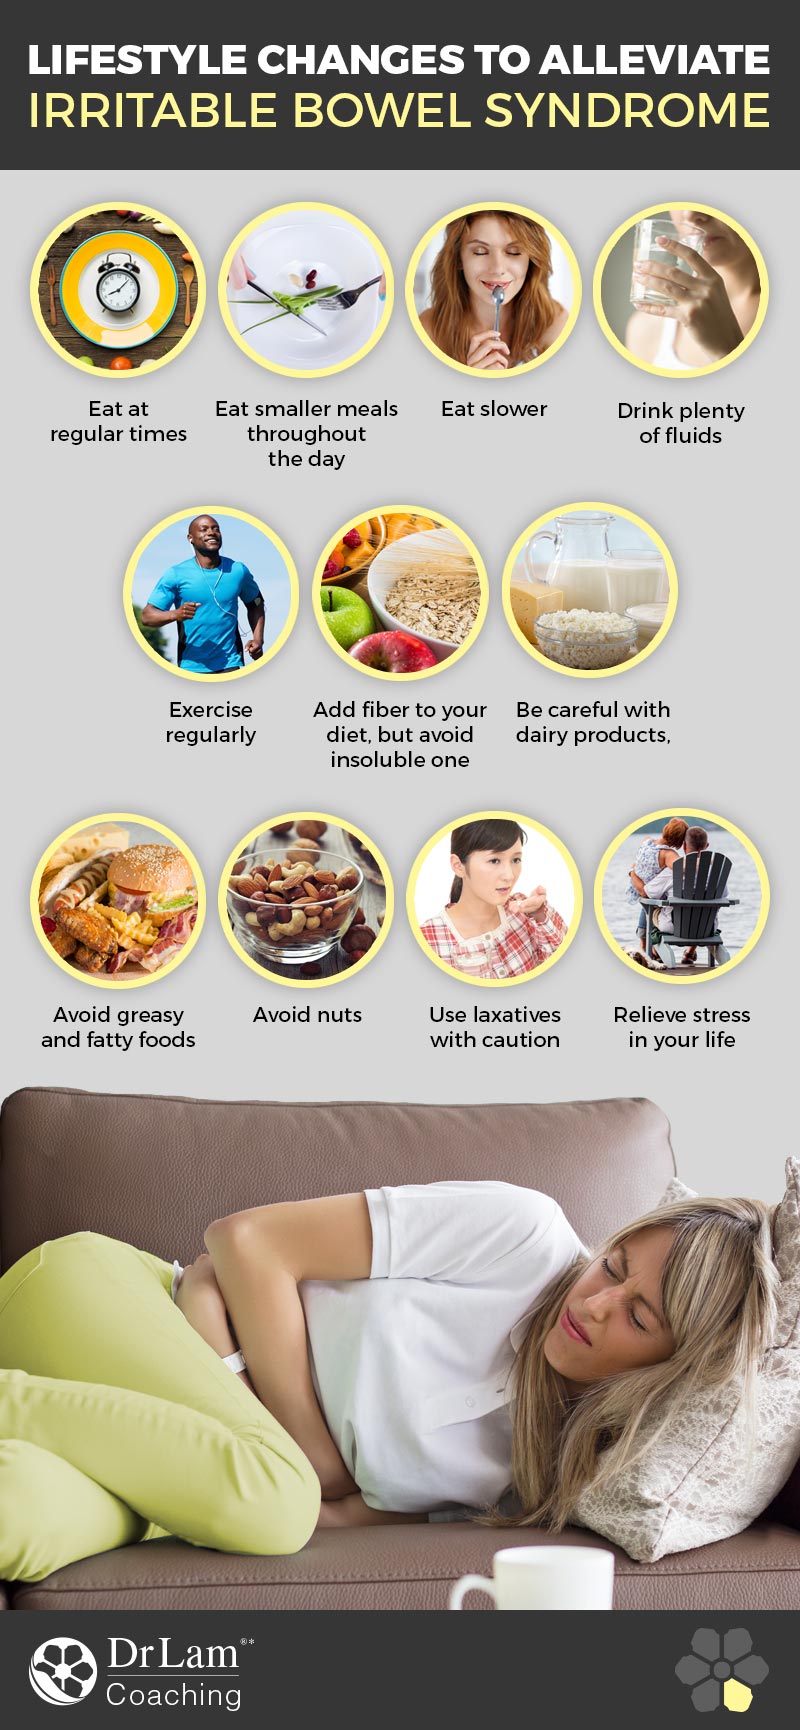 Check out this easy to understand infographic about alleviating IBS with lifestyle changes